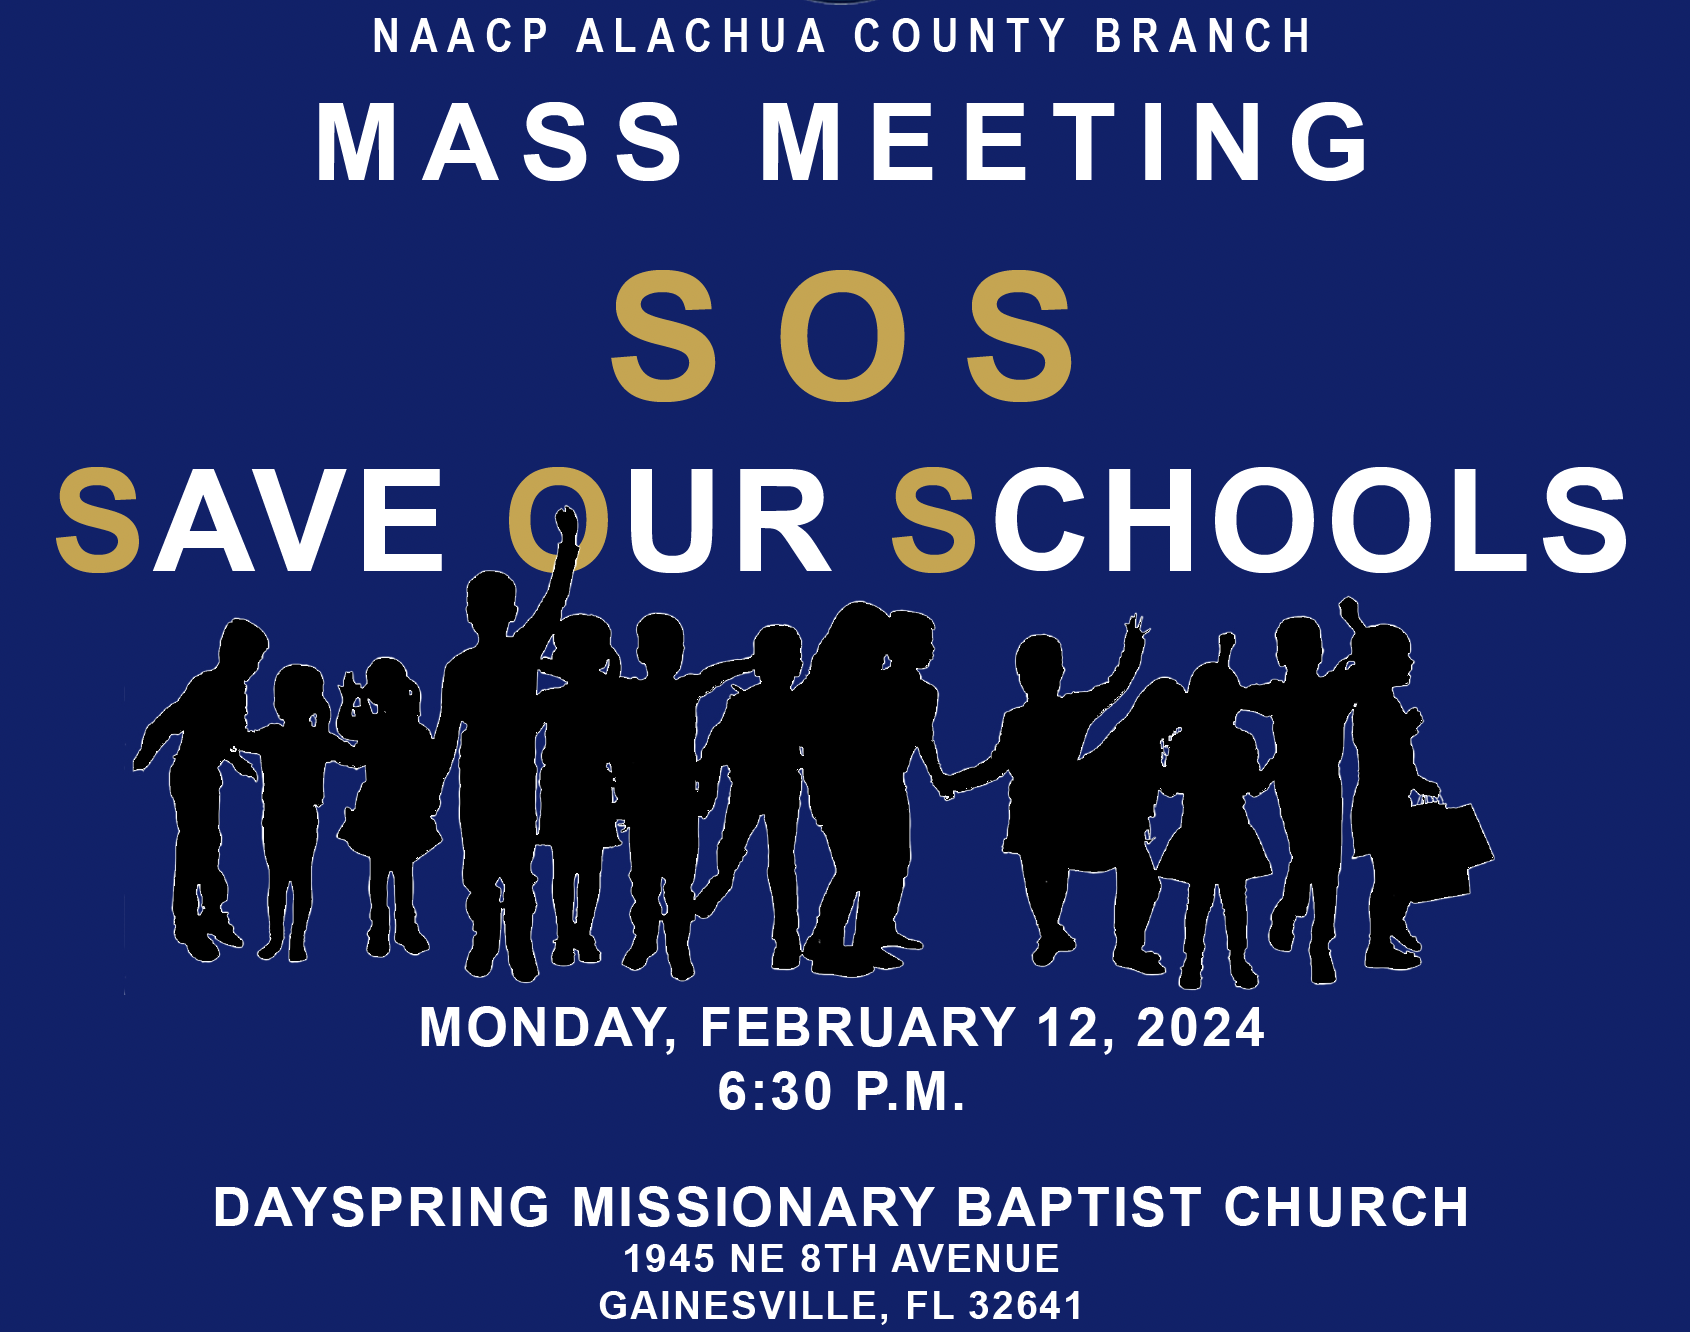 NAACP Save Our Schools flyer white and tan text on blue background with group of school children graphic